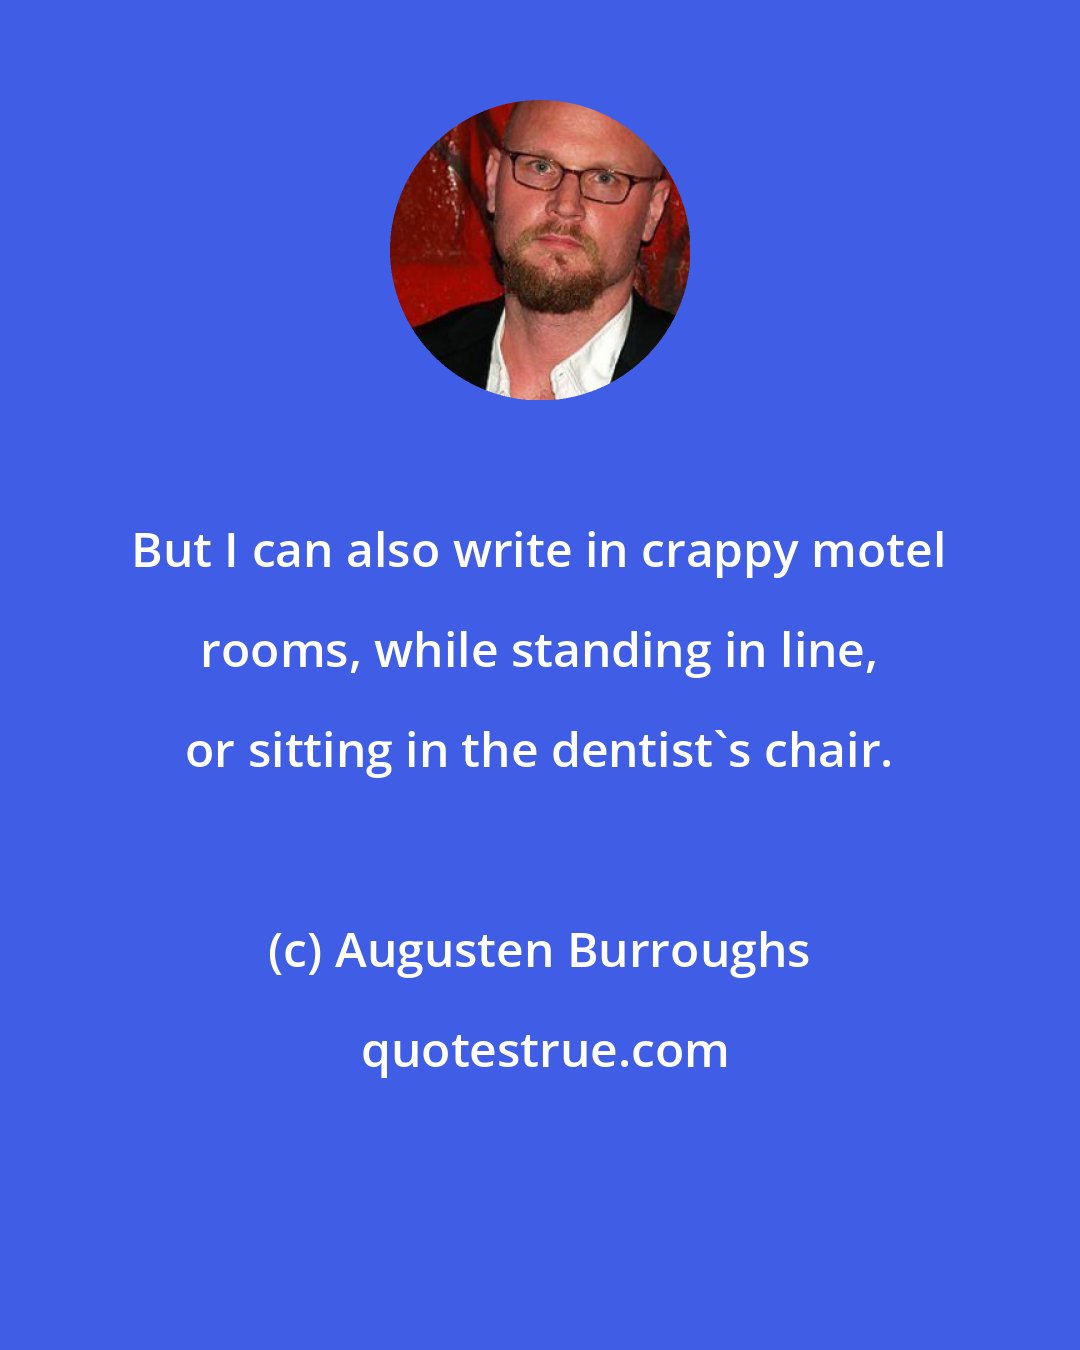 Augusten Burroughs: But I can also write in crappy motel rooms, while standing in line, or sitting in the dentist's chair.